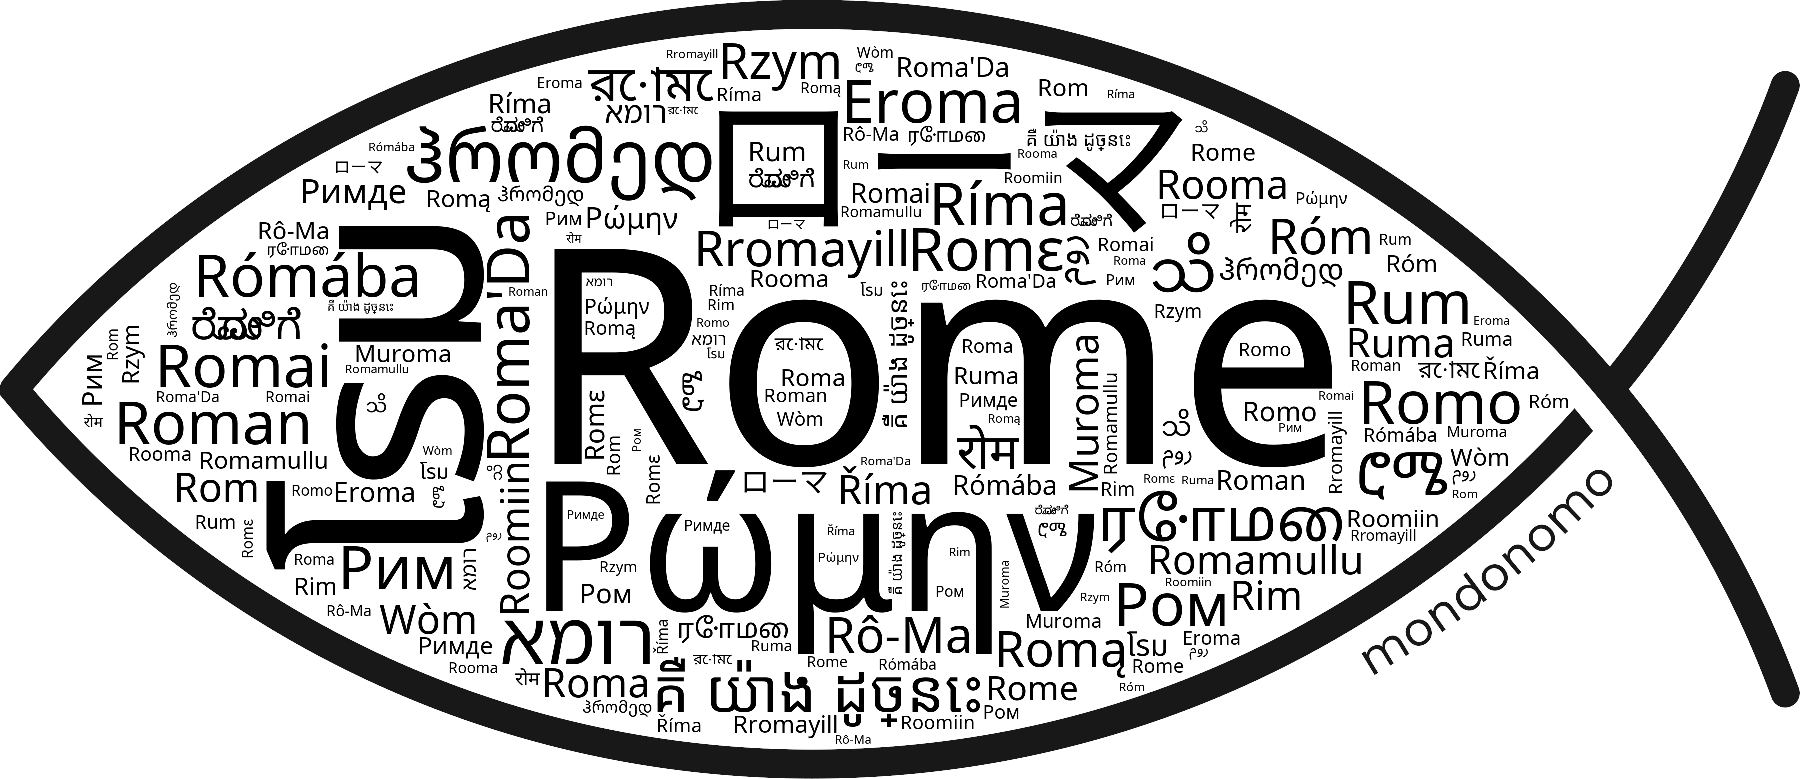 Name Rome in the world's Bibles